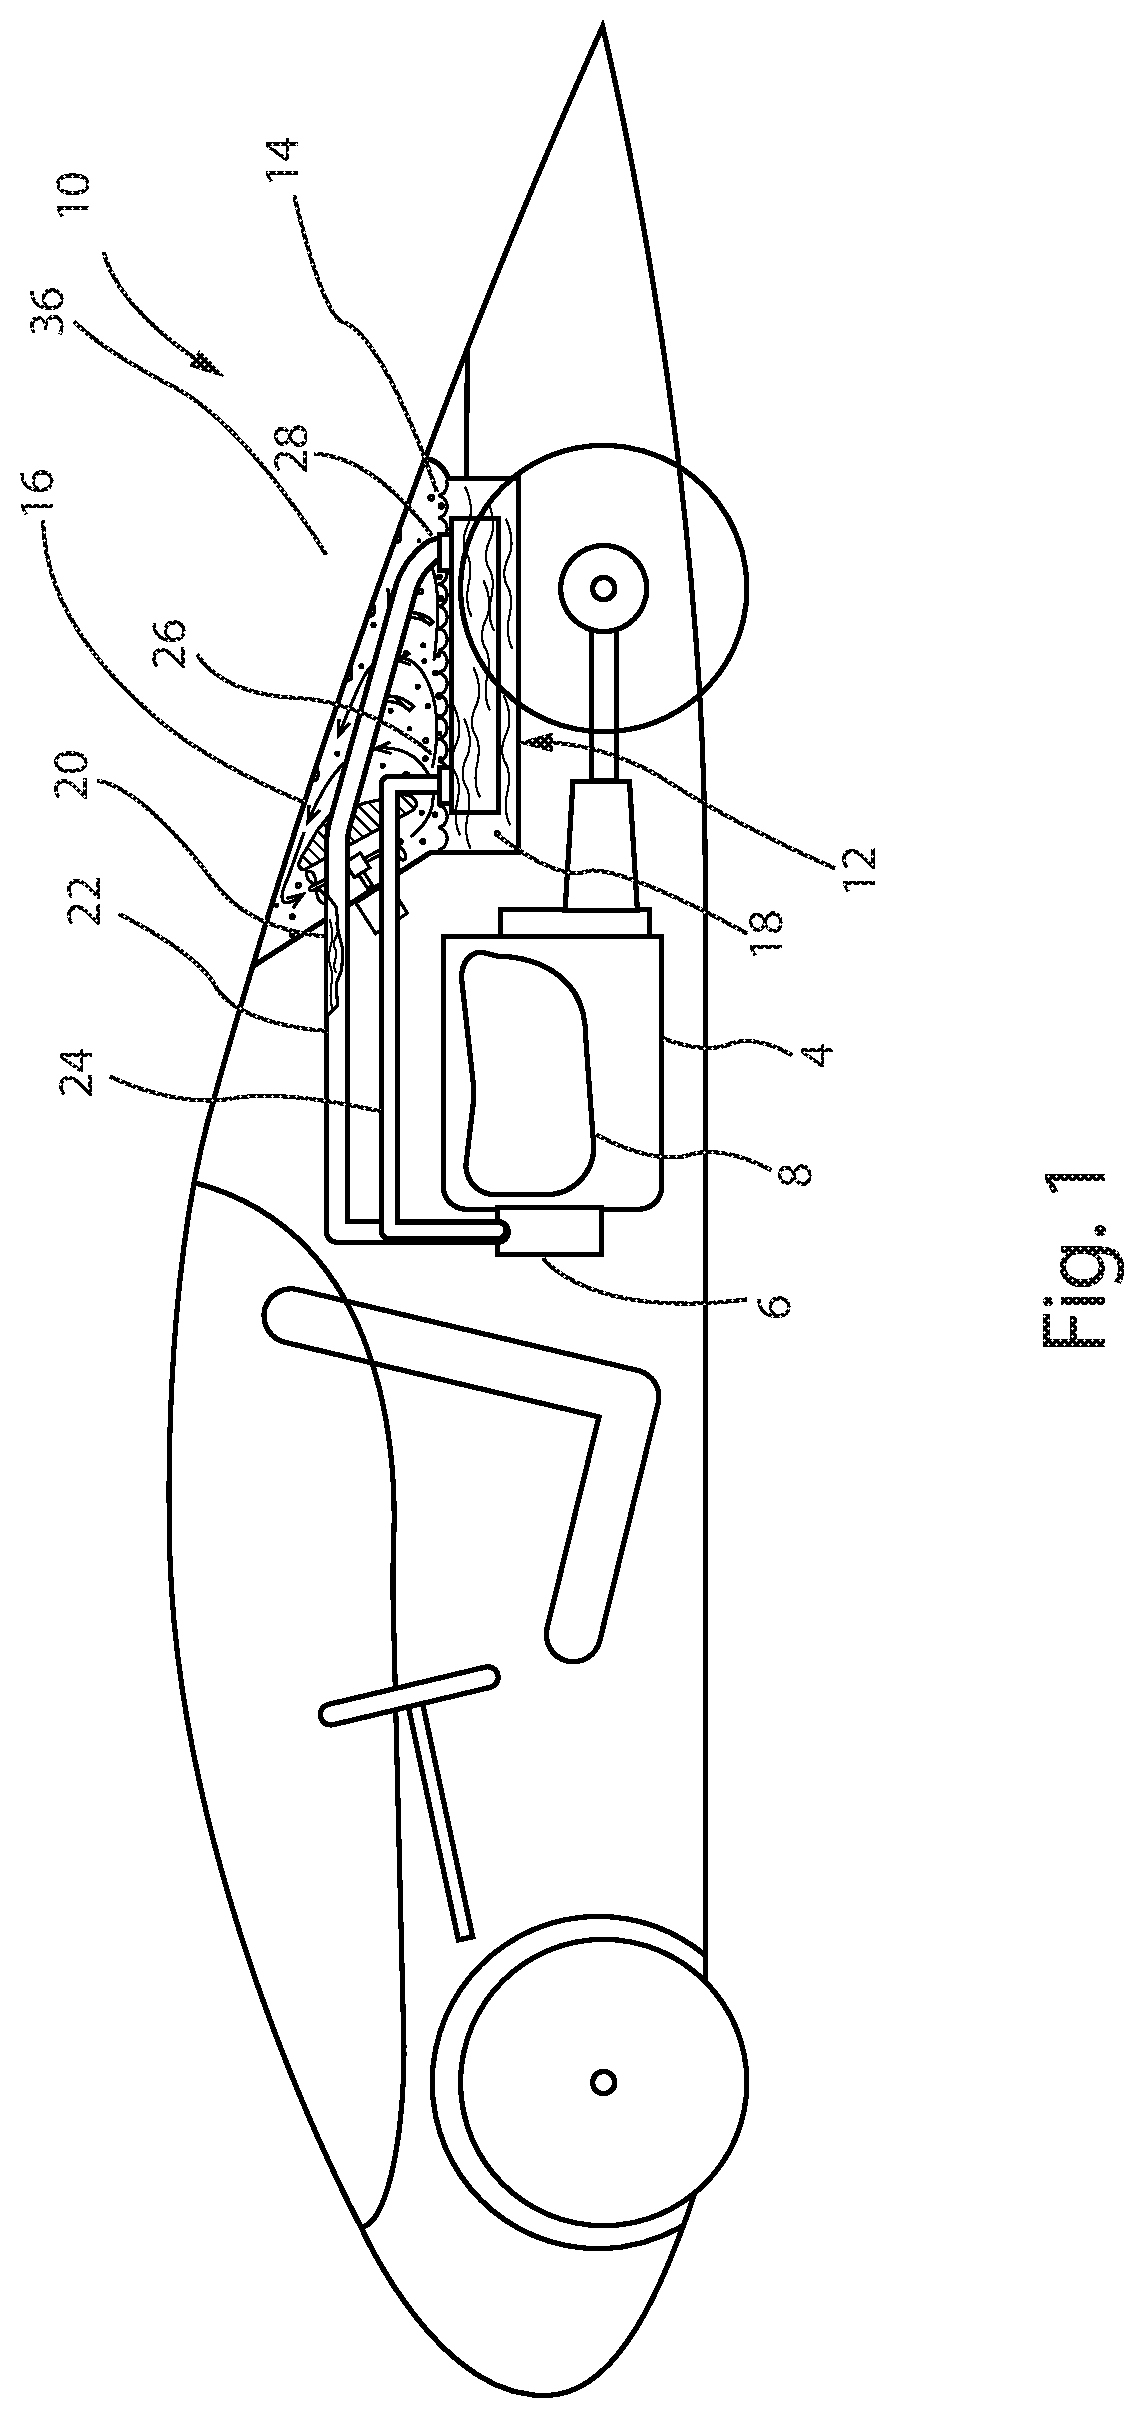 Alternative method of heat removal from an internal combustion engine